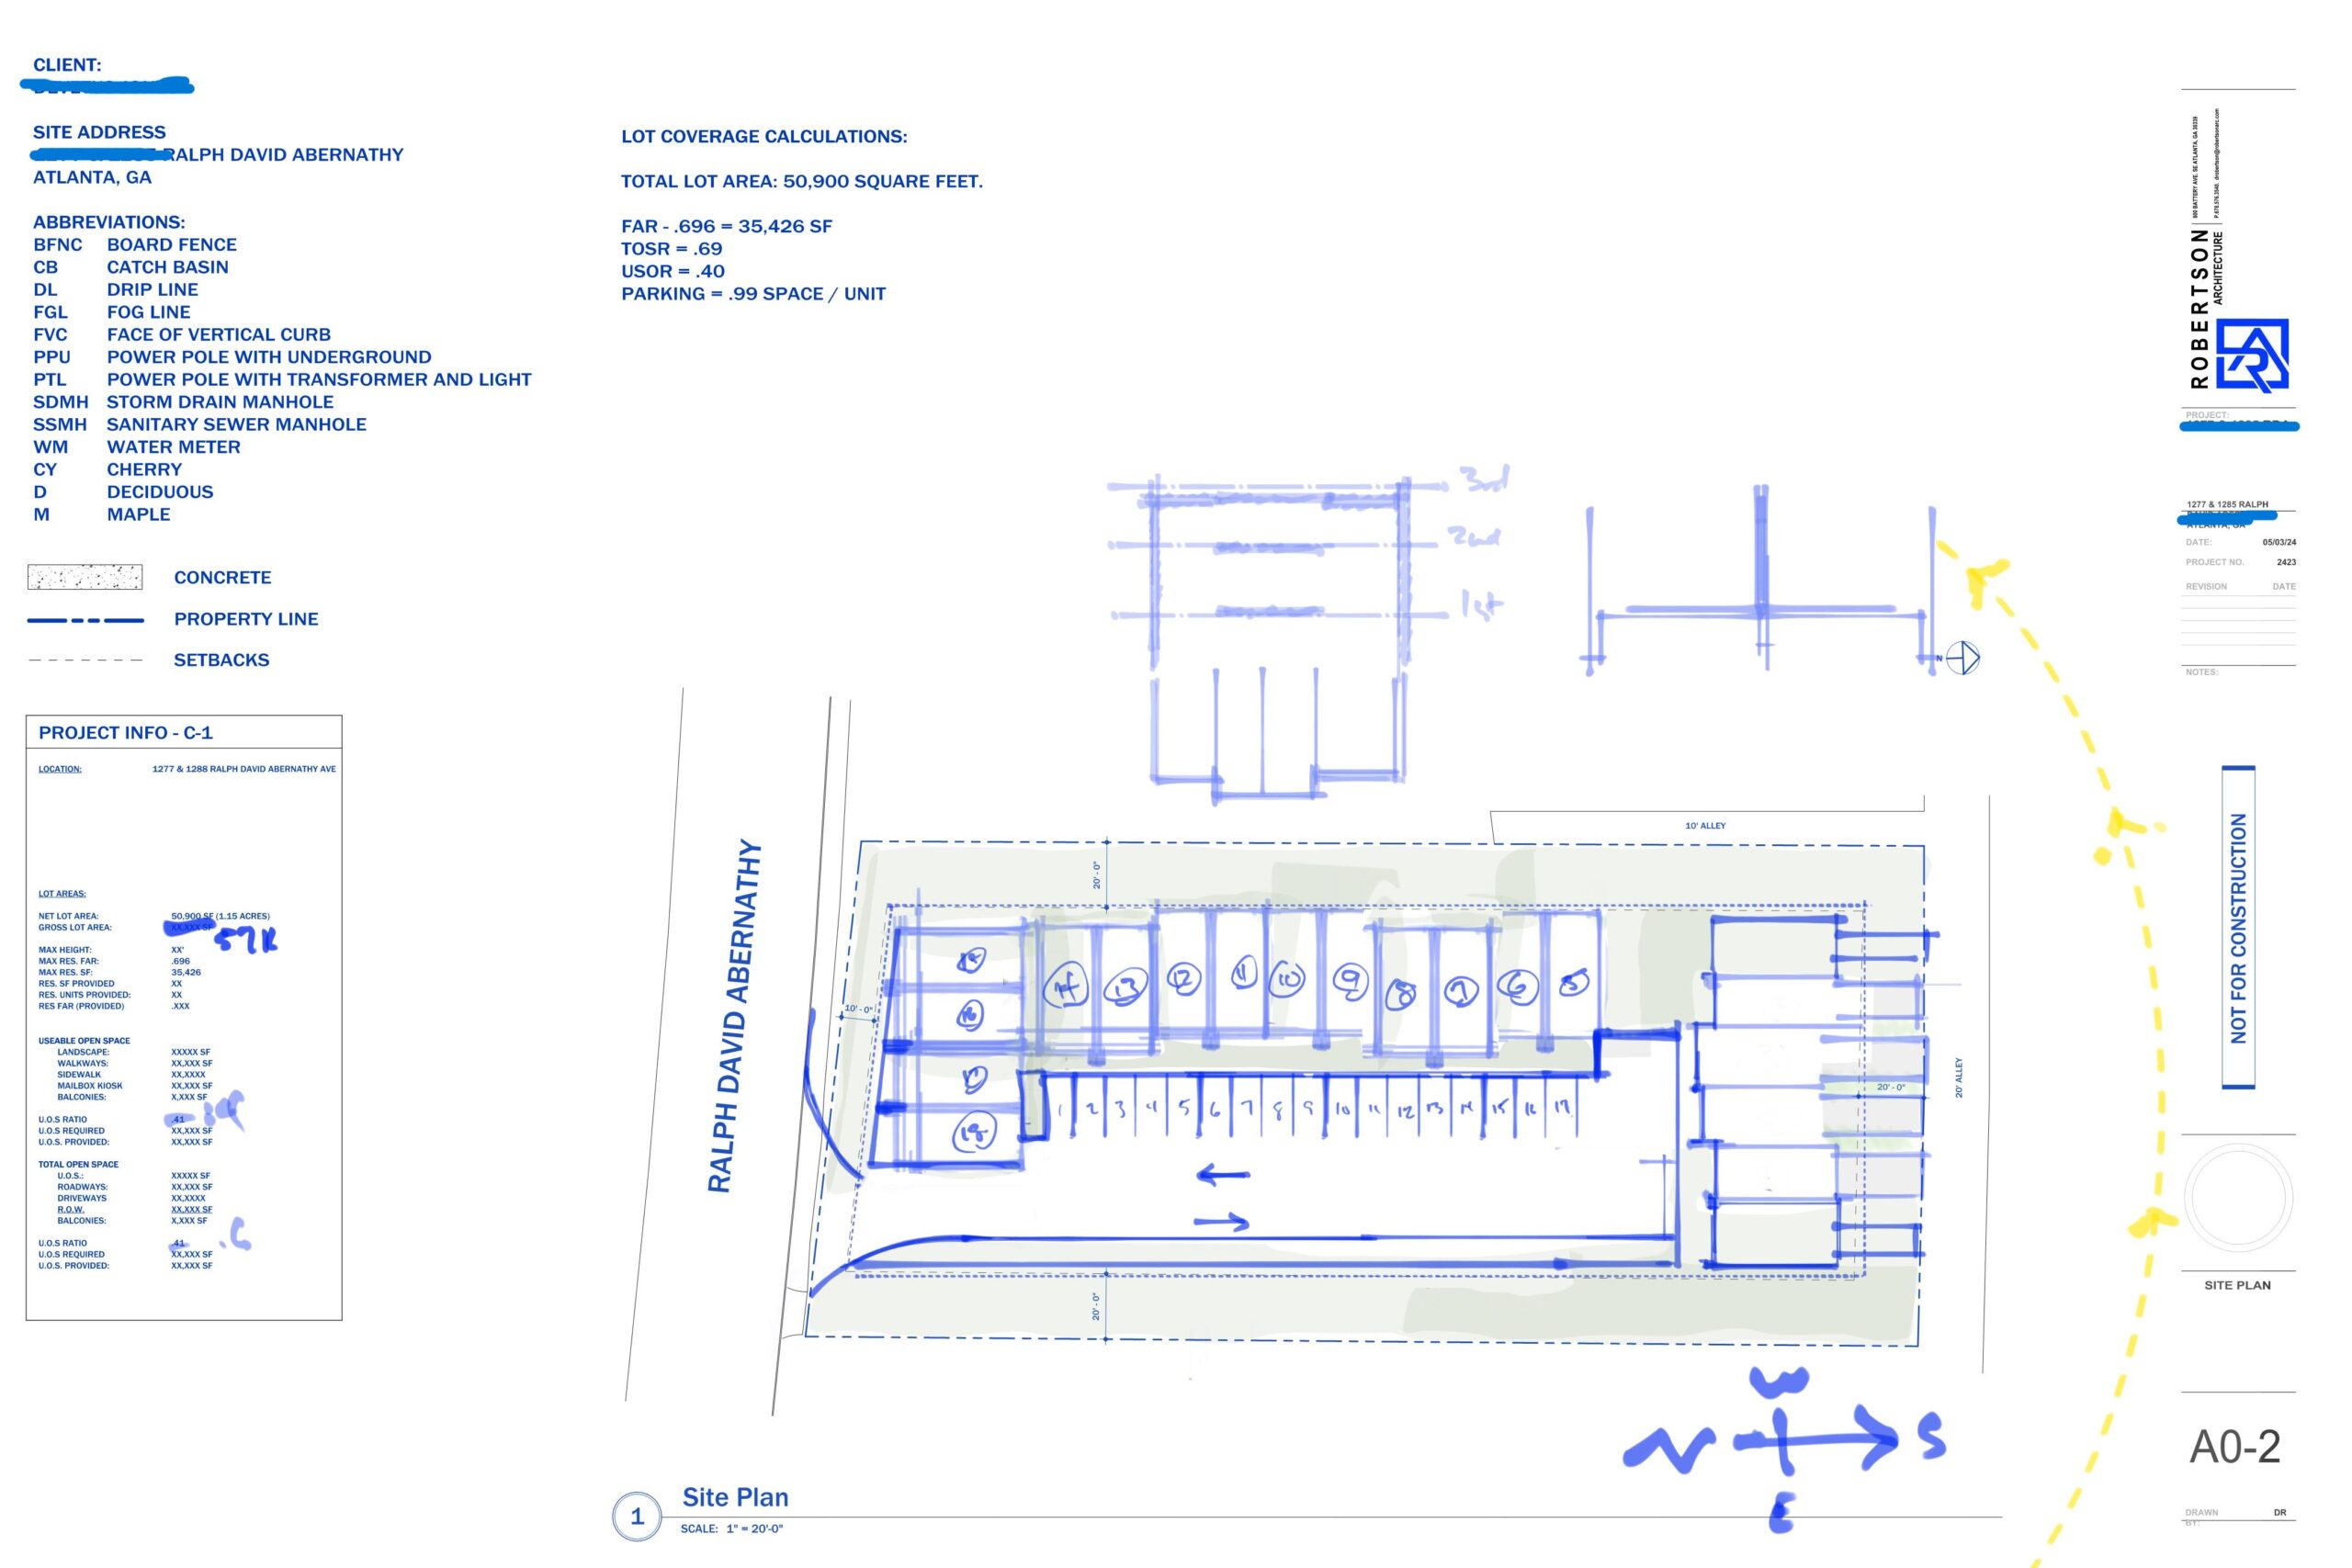 Site analysis for a potential townhome development.